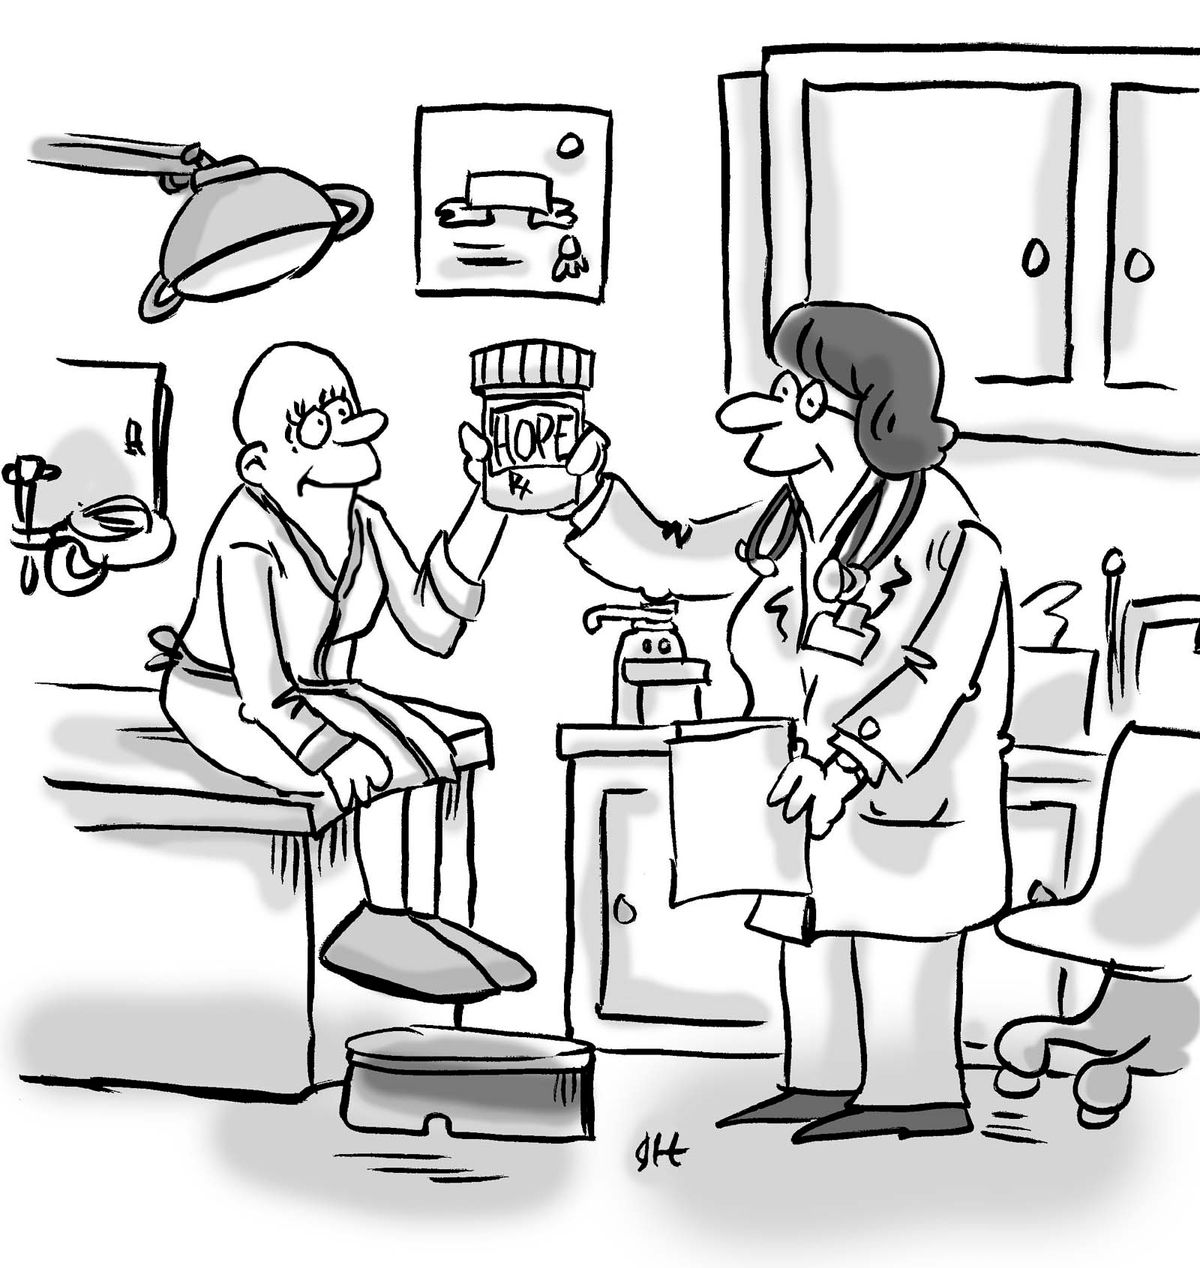 Comic of a doctor passing a patient a bottle of pills labeled "Hope".